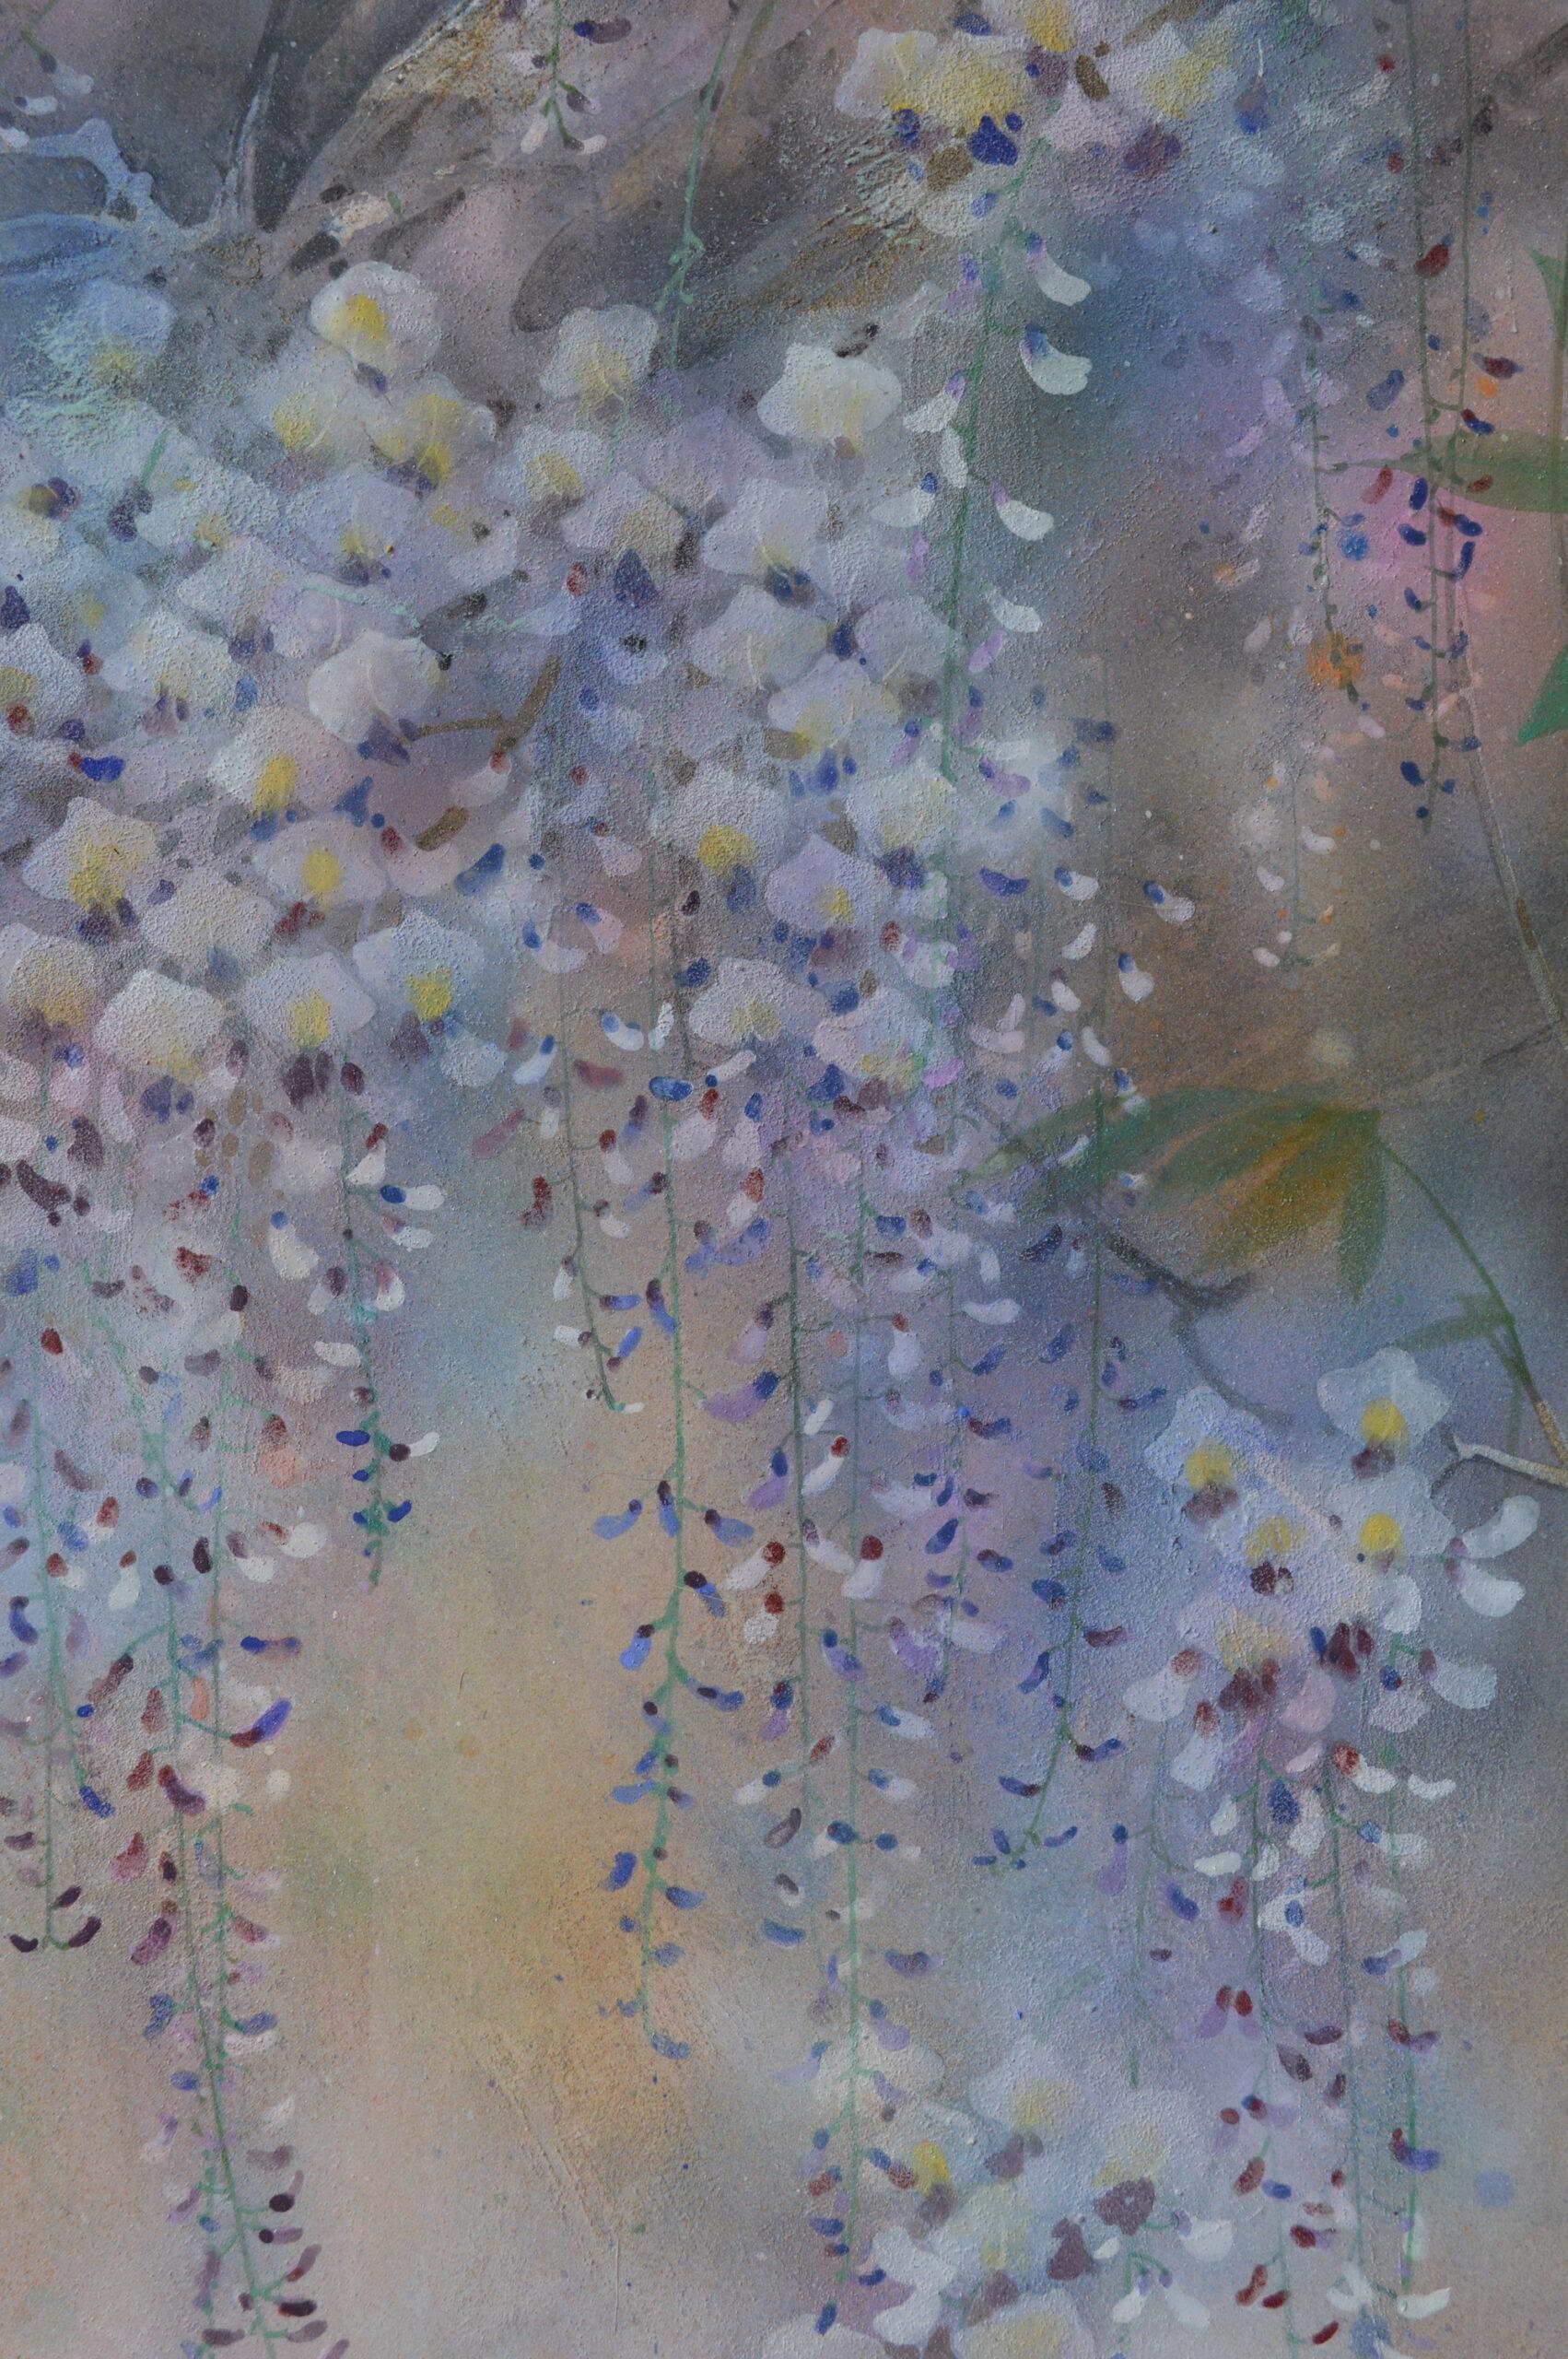 Spring Rain by Chen Yiching - Contemporary nihonga painting, flowers, wisteria For Sale 4